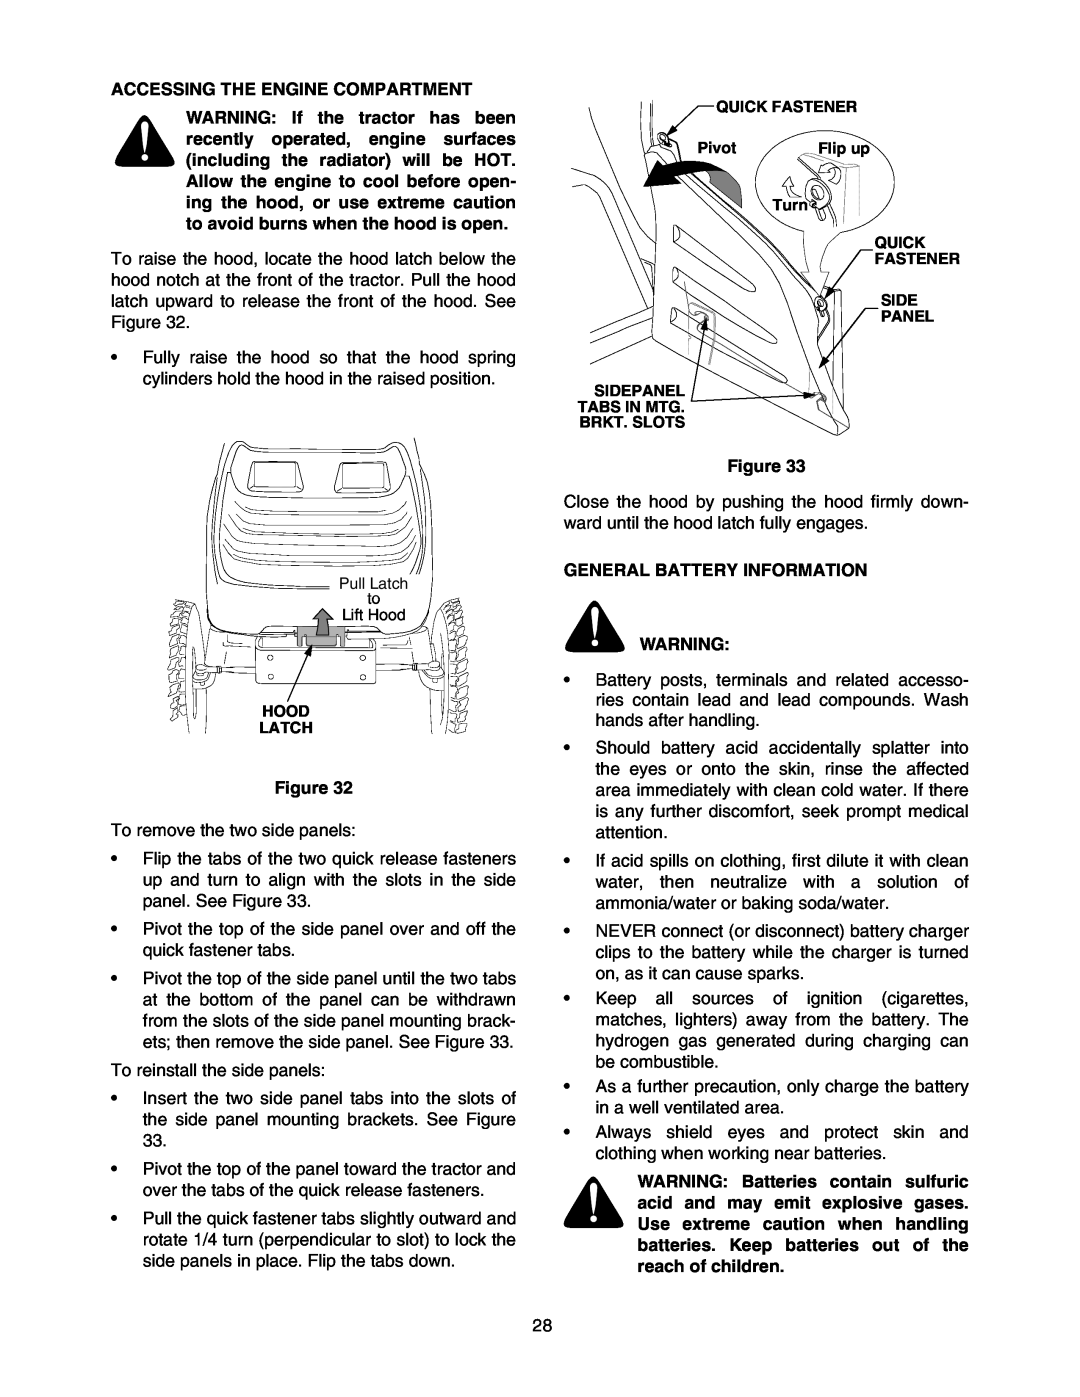 Cub Cadet 5264D manual Accessing The Engine Compartment, General Battery Information 